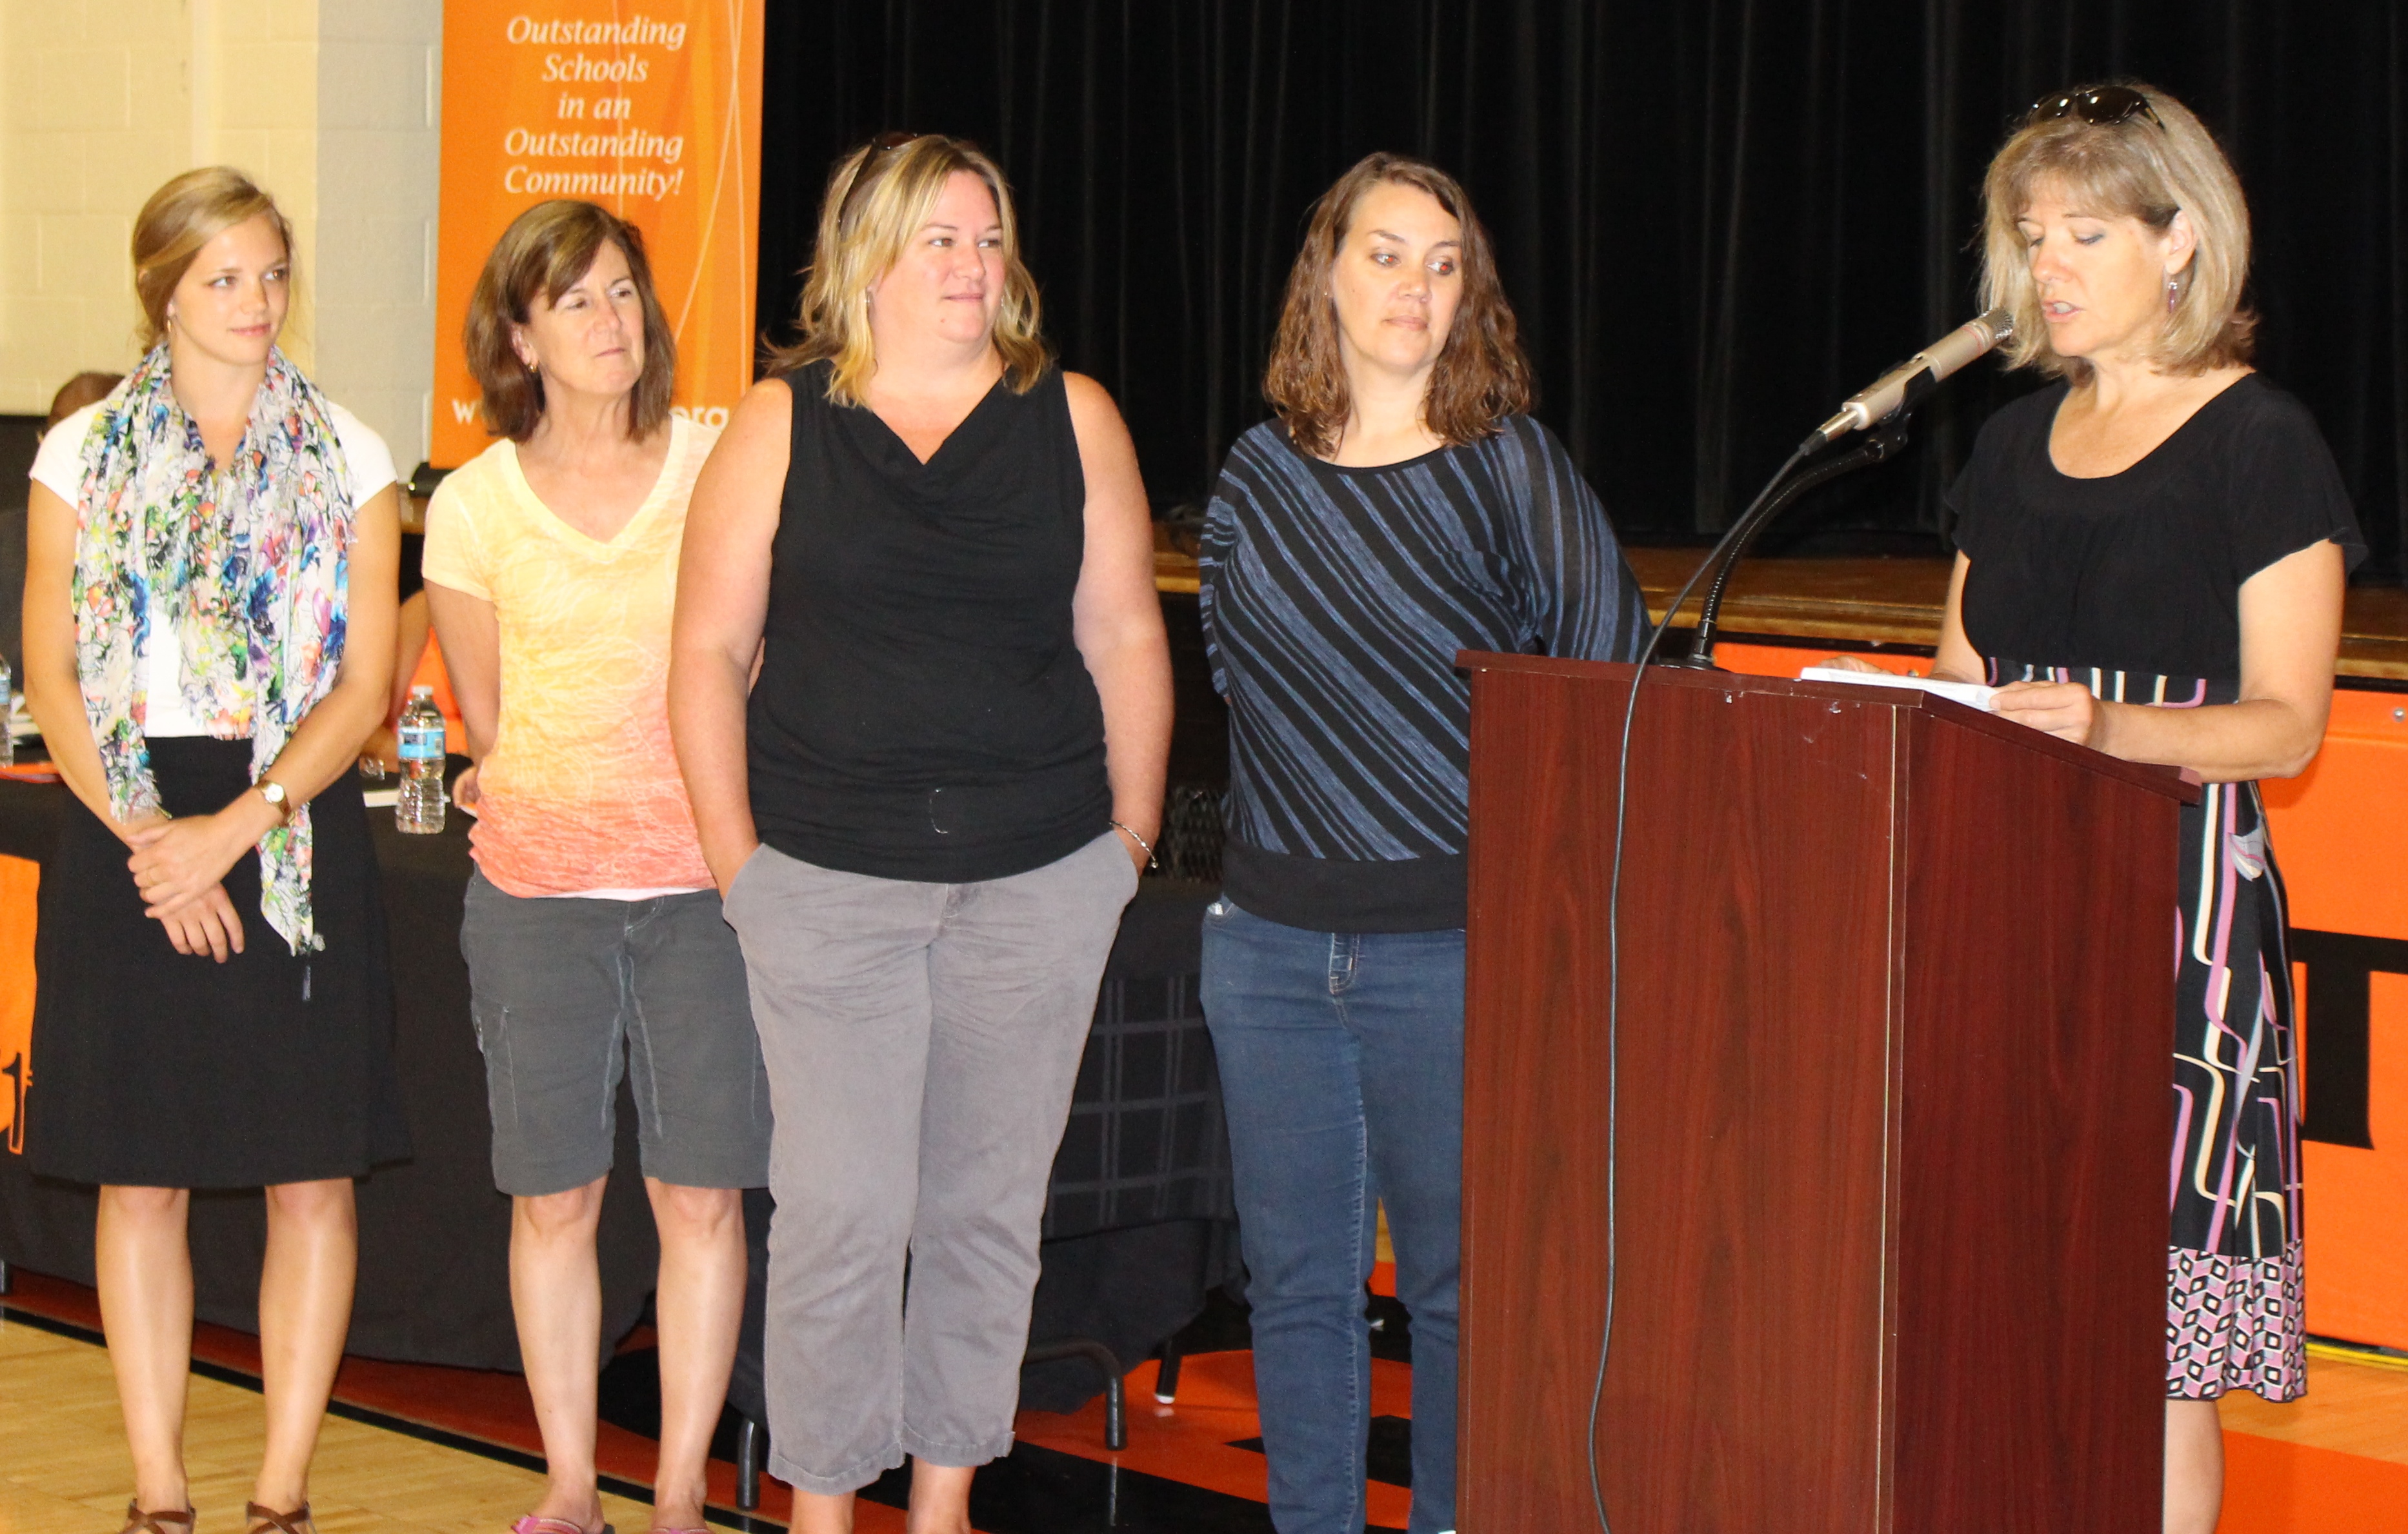 Carol Lynn Comparetto (Central HS), Jill Lagerstam (Urbana HS), Shannon Percoco (Centennial HS) and Susan Gleason (Urbana HS) are acknoledged by CUSF Executive Director Molly Delaney during the opening day ceremony at Urbana Middle School, Urbana, Ill.